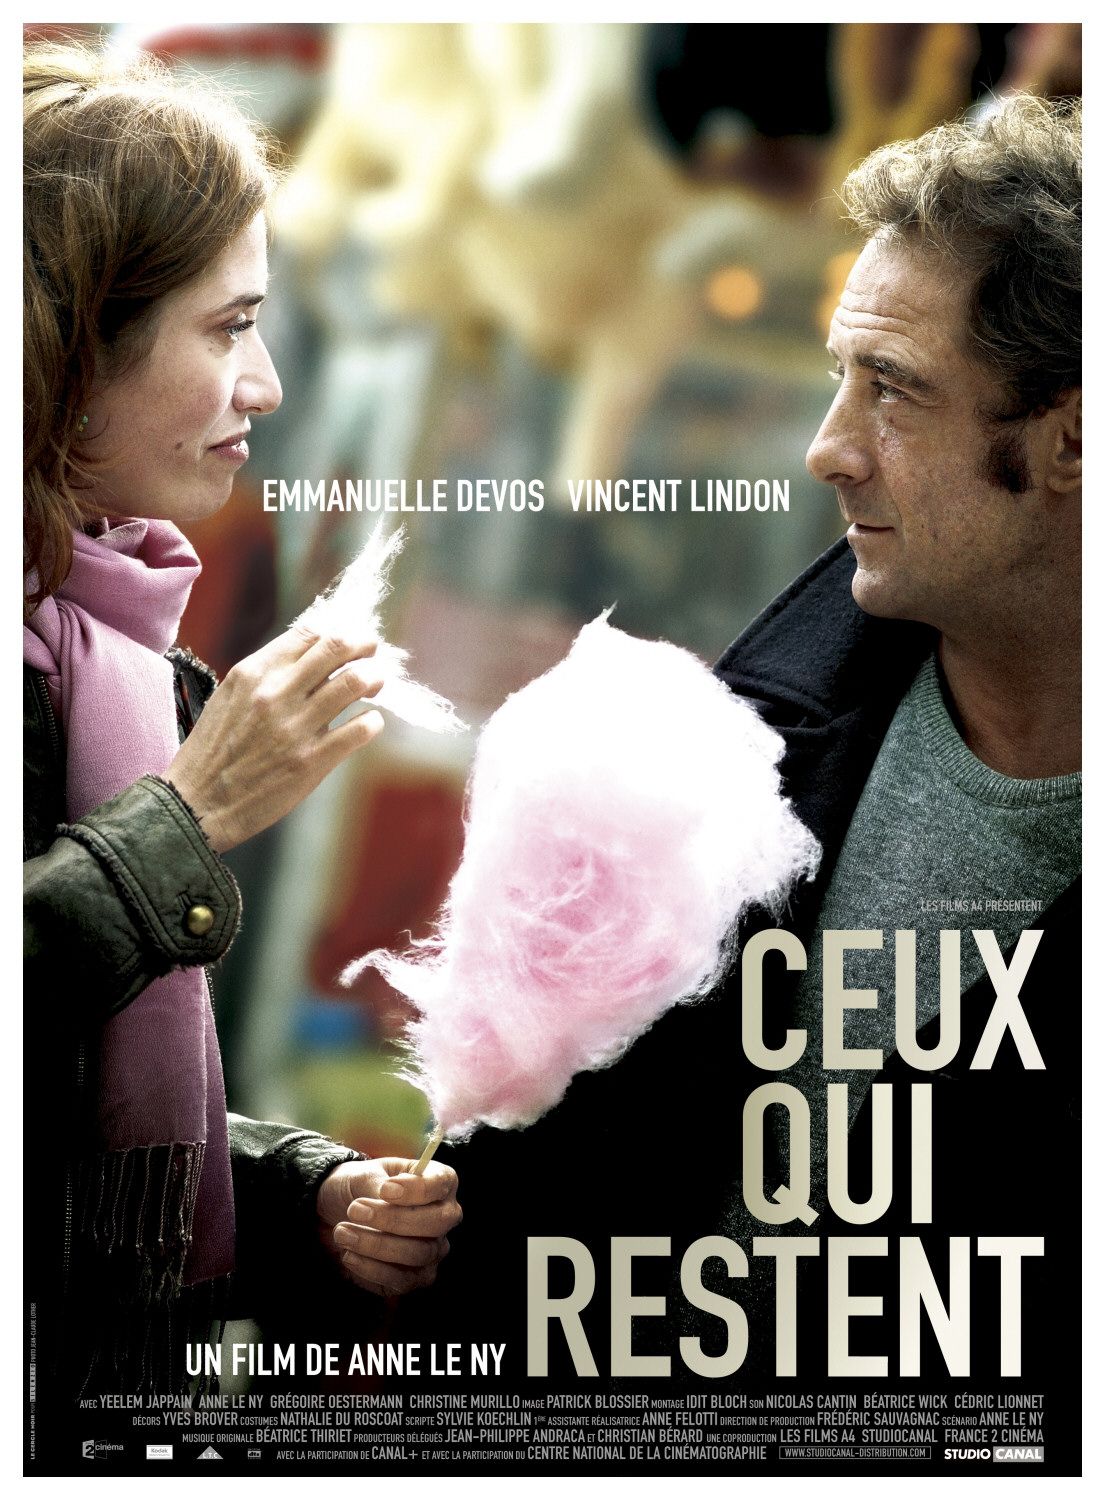 Extra Large Movie Poster Image for Ceux qui restent 